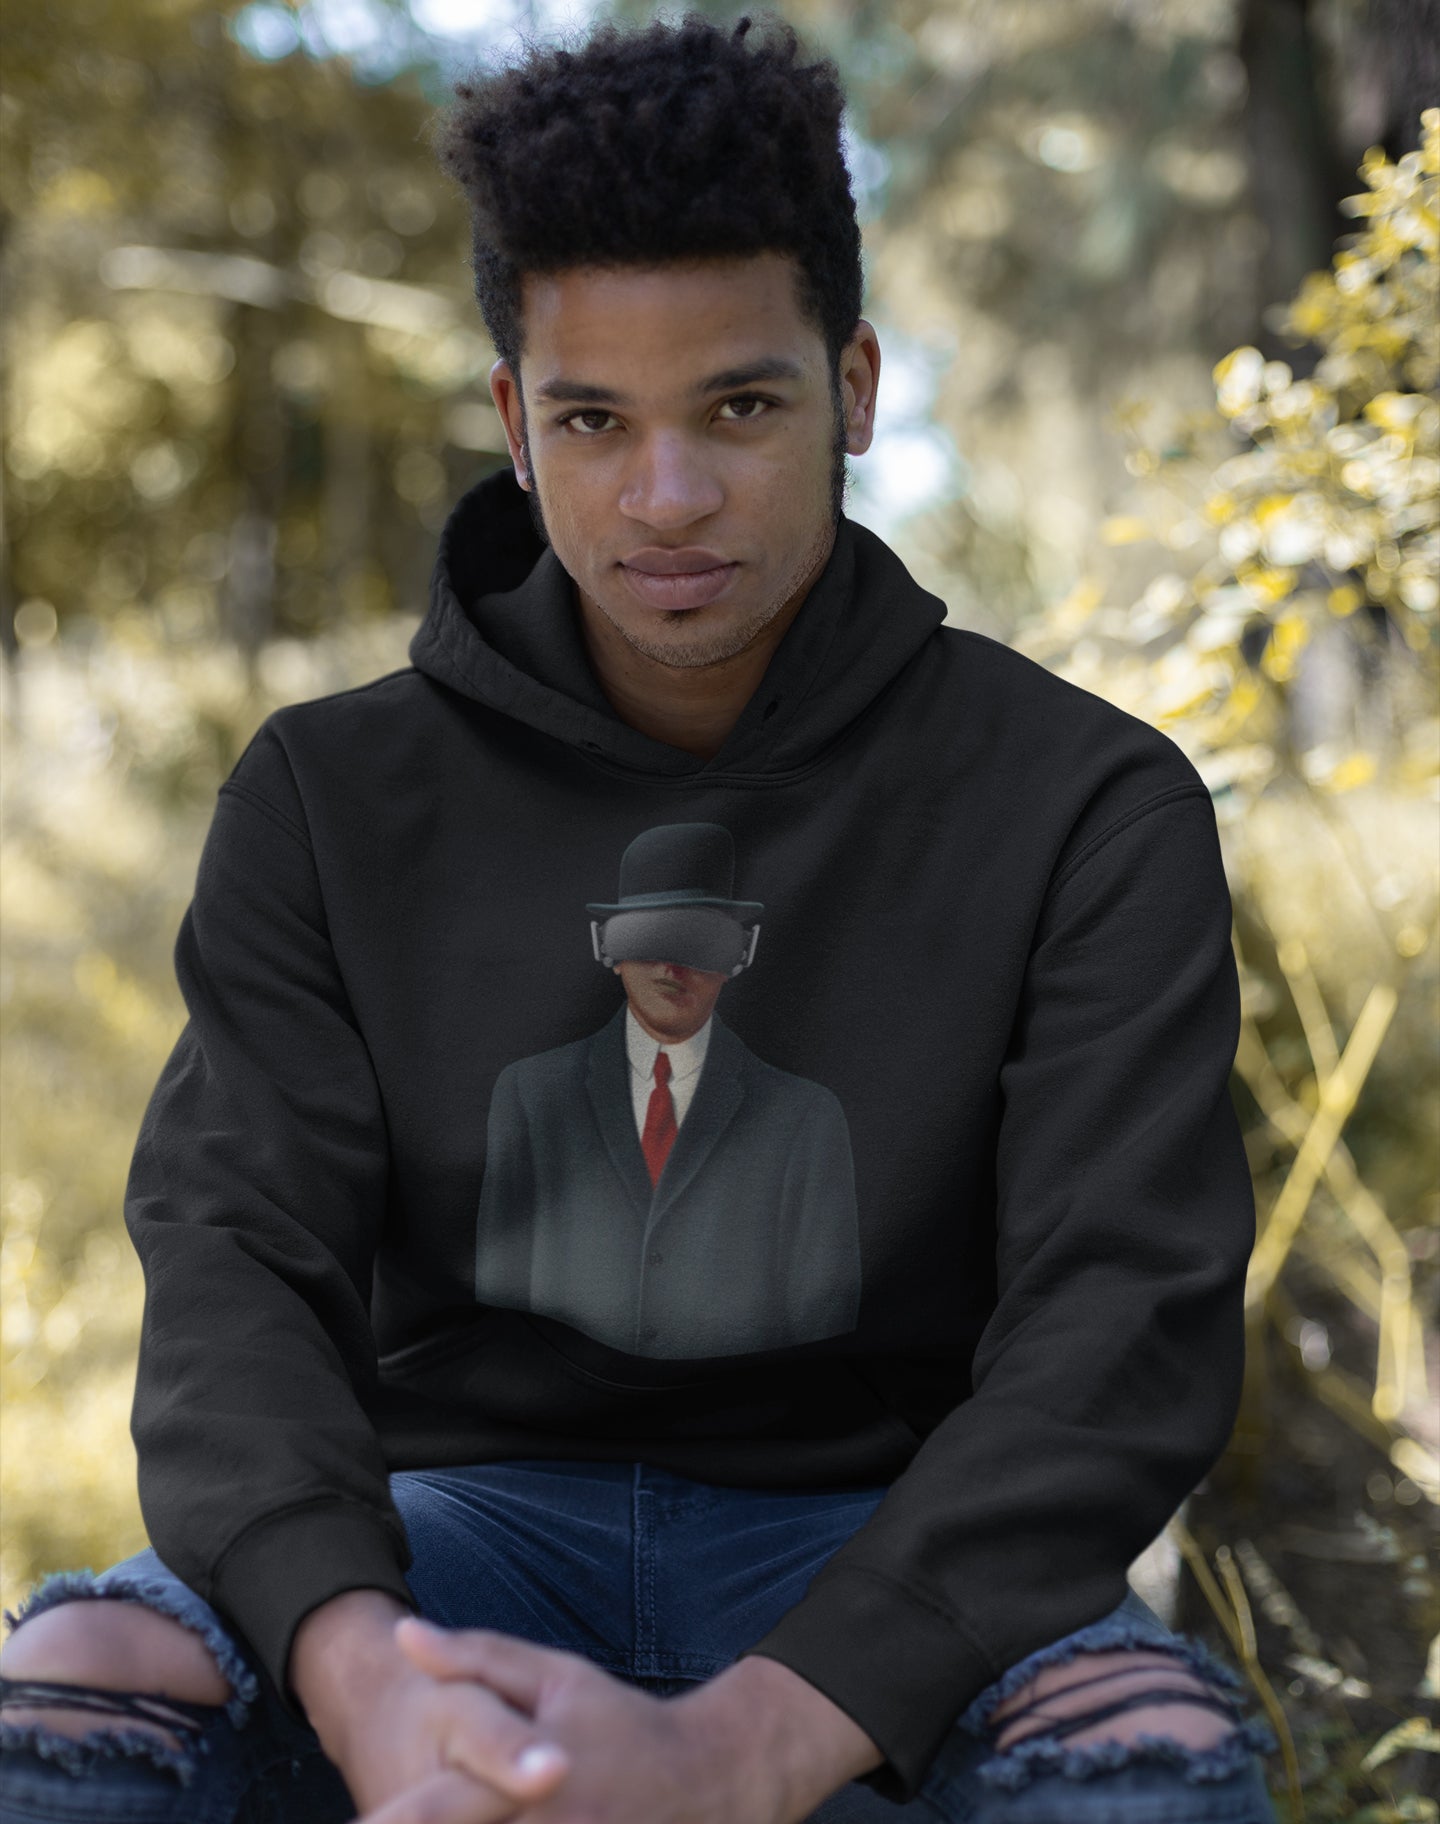 Son Of Oculus - Cut-Out Variant - SexyHackers Exclusive Unisex Hoodie